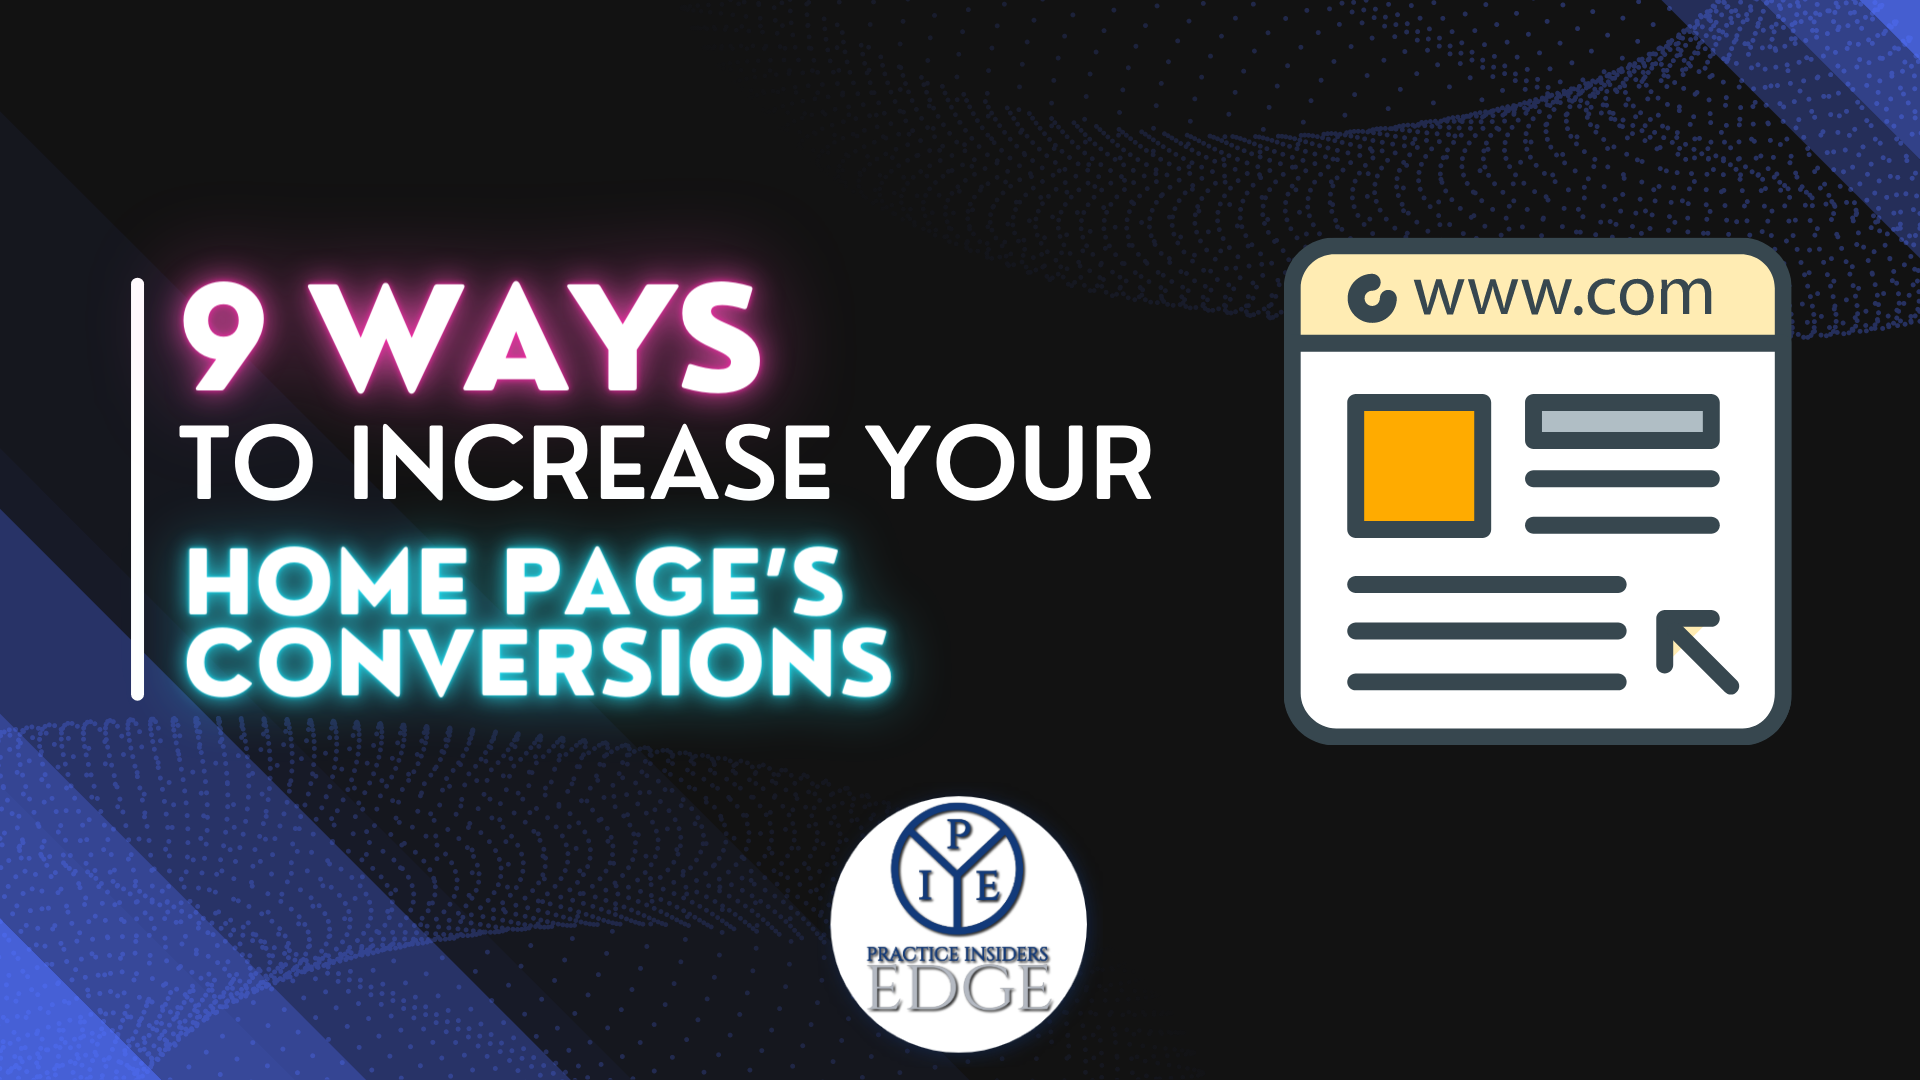 9 Ways To Increase Your Practice’s Home Page Conversions